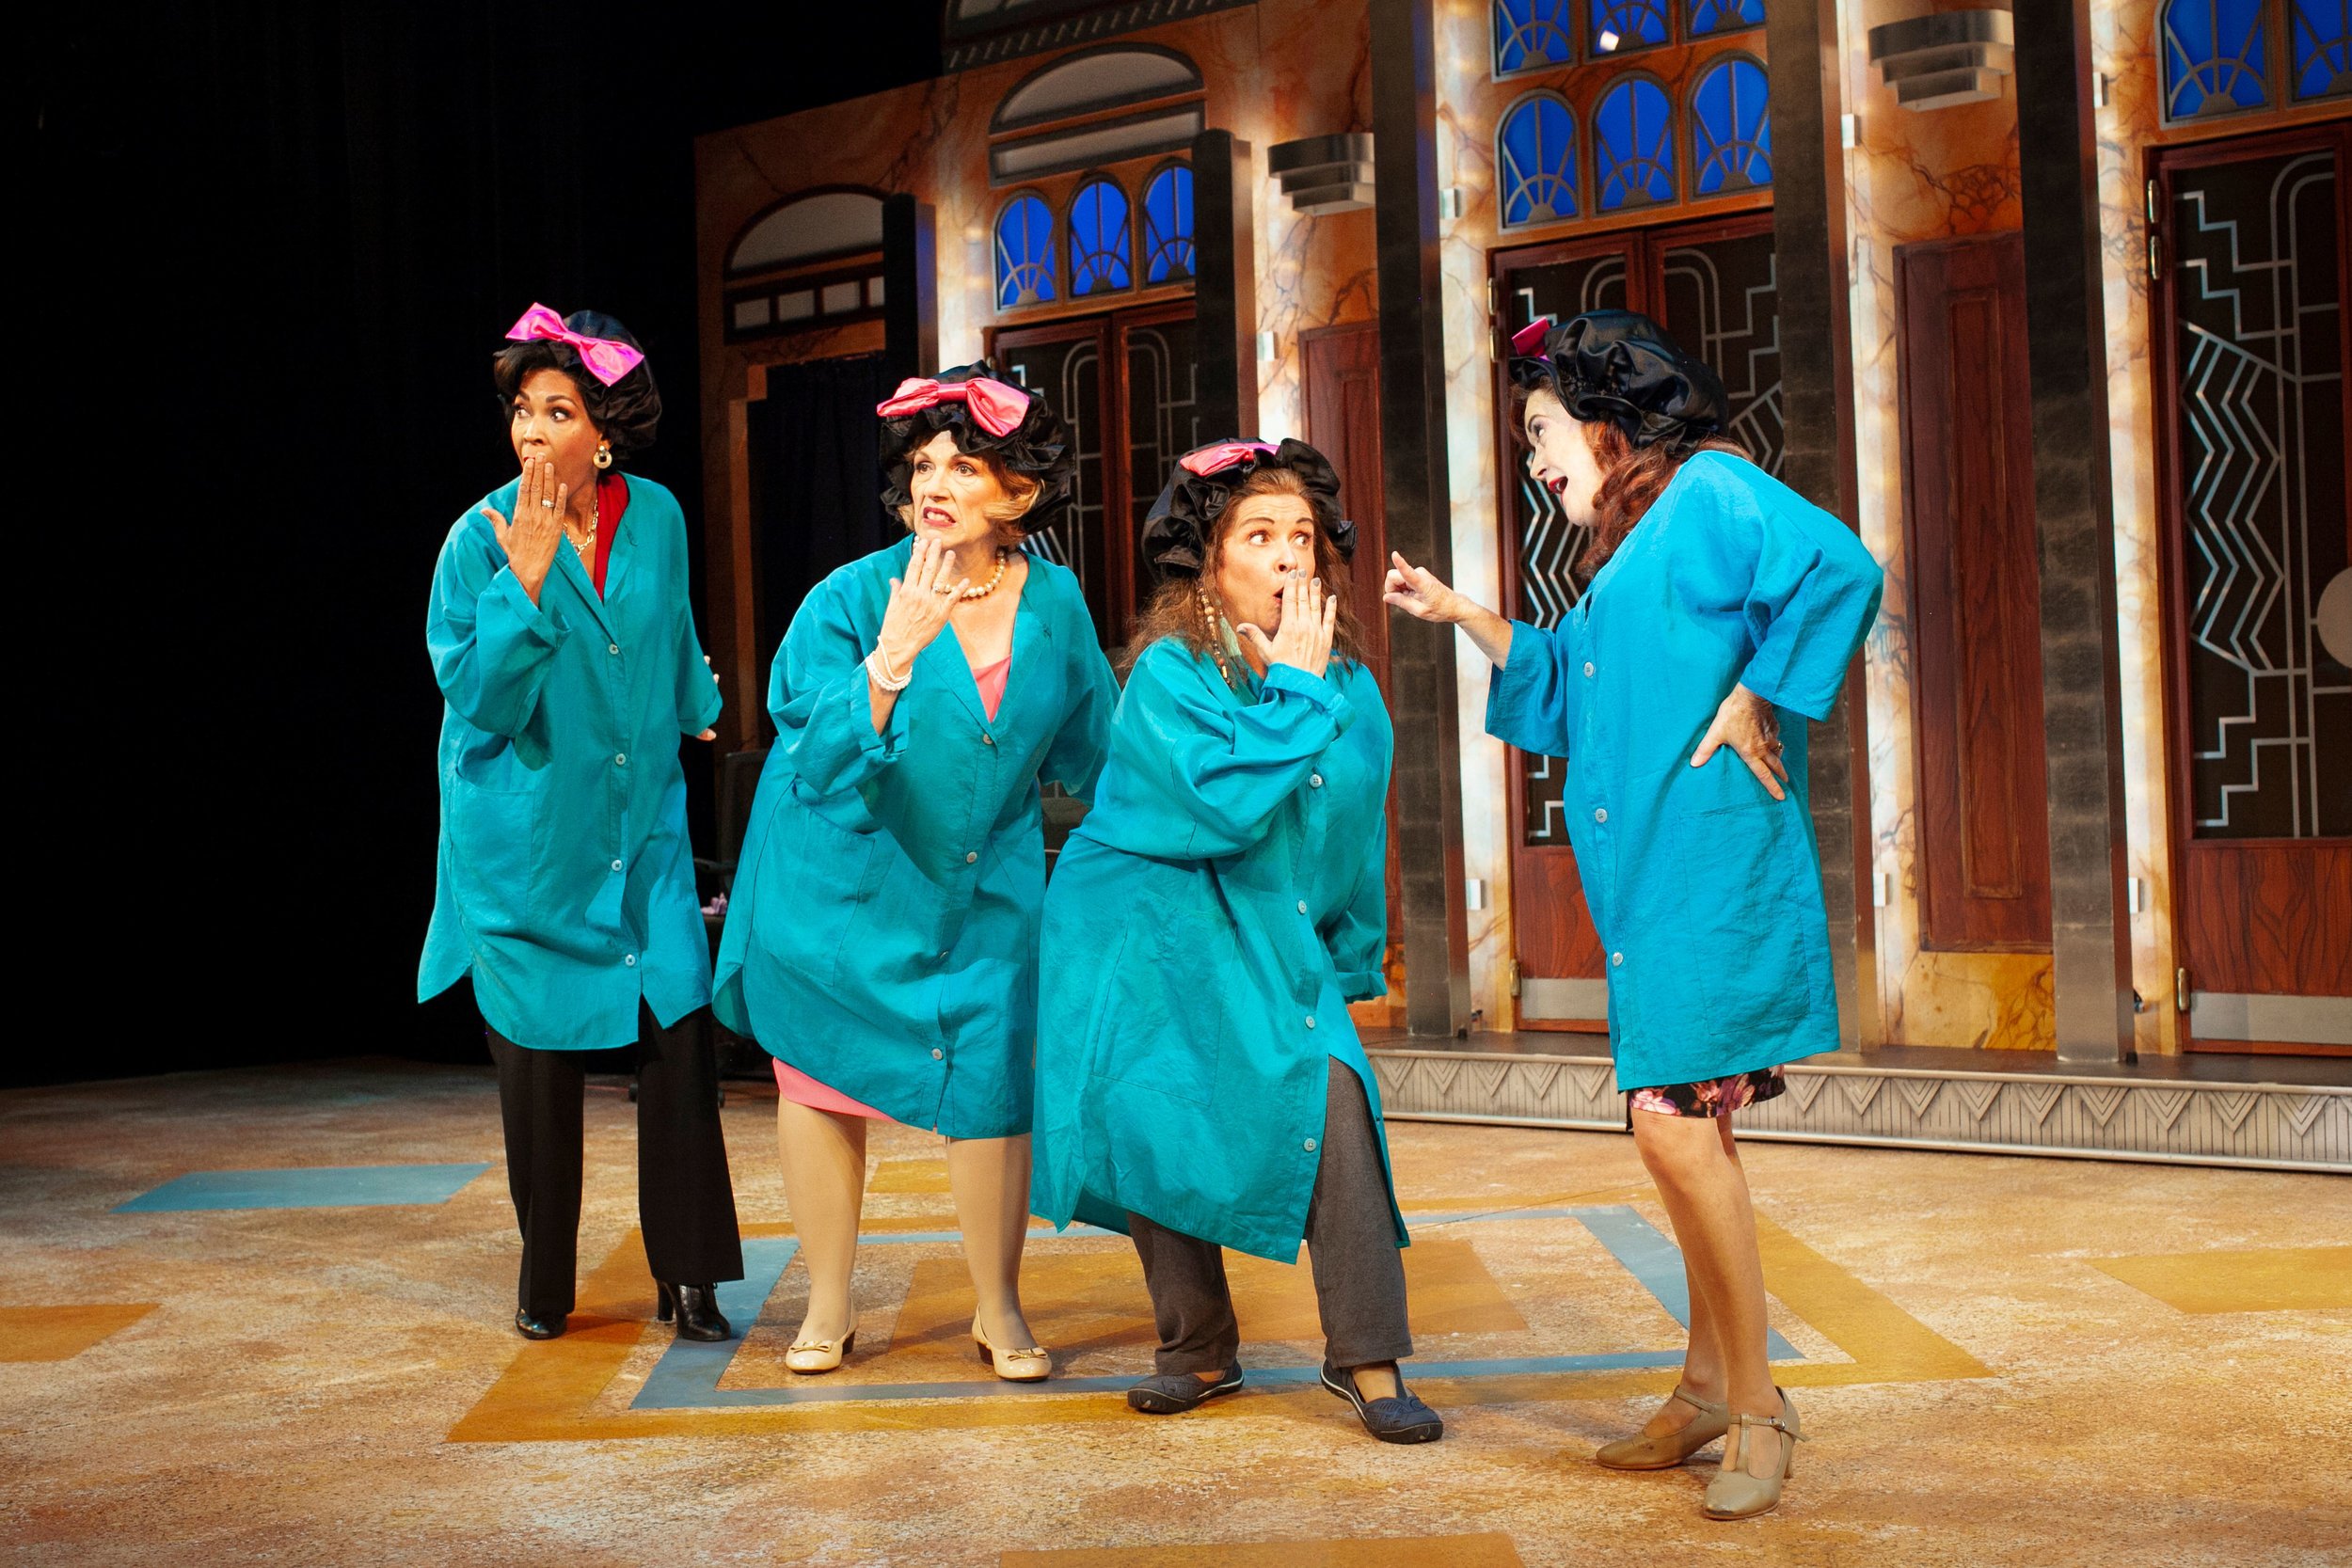  Anise Ritchie, Roberta B. Wall, Melanie Souza, and Kathy St. George in Menopause The Musical® (2019) Photo by Jay Goldsmith 